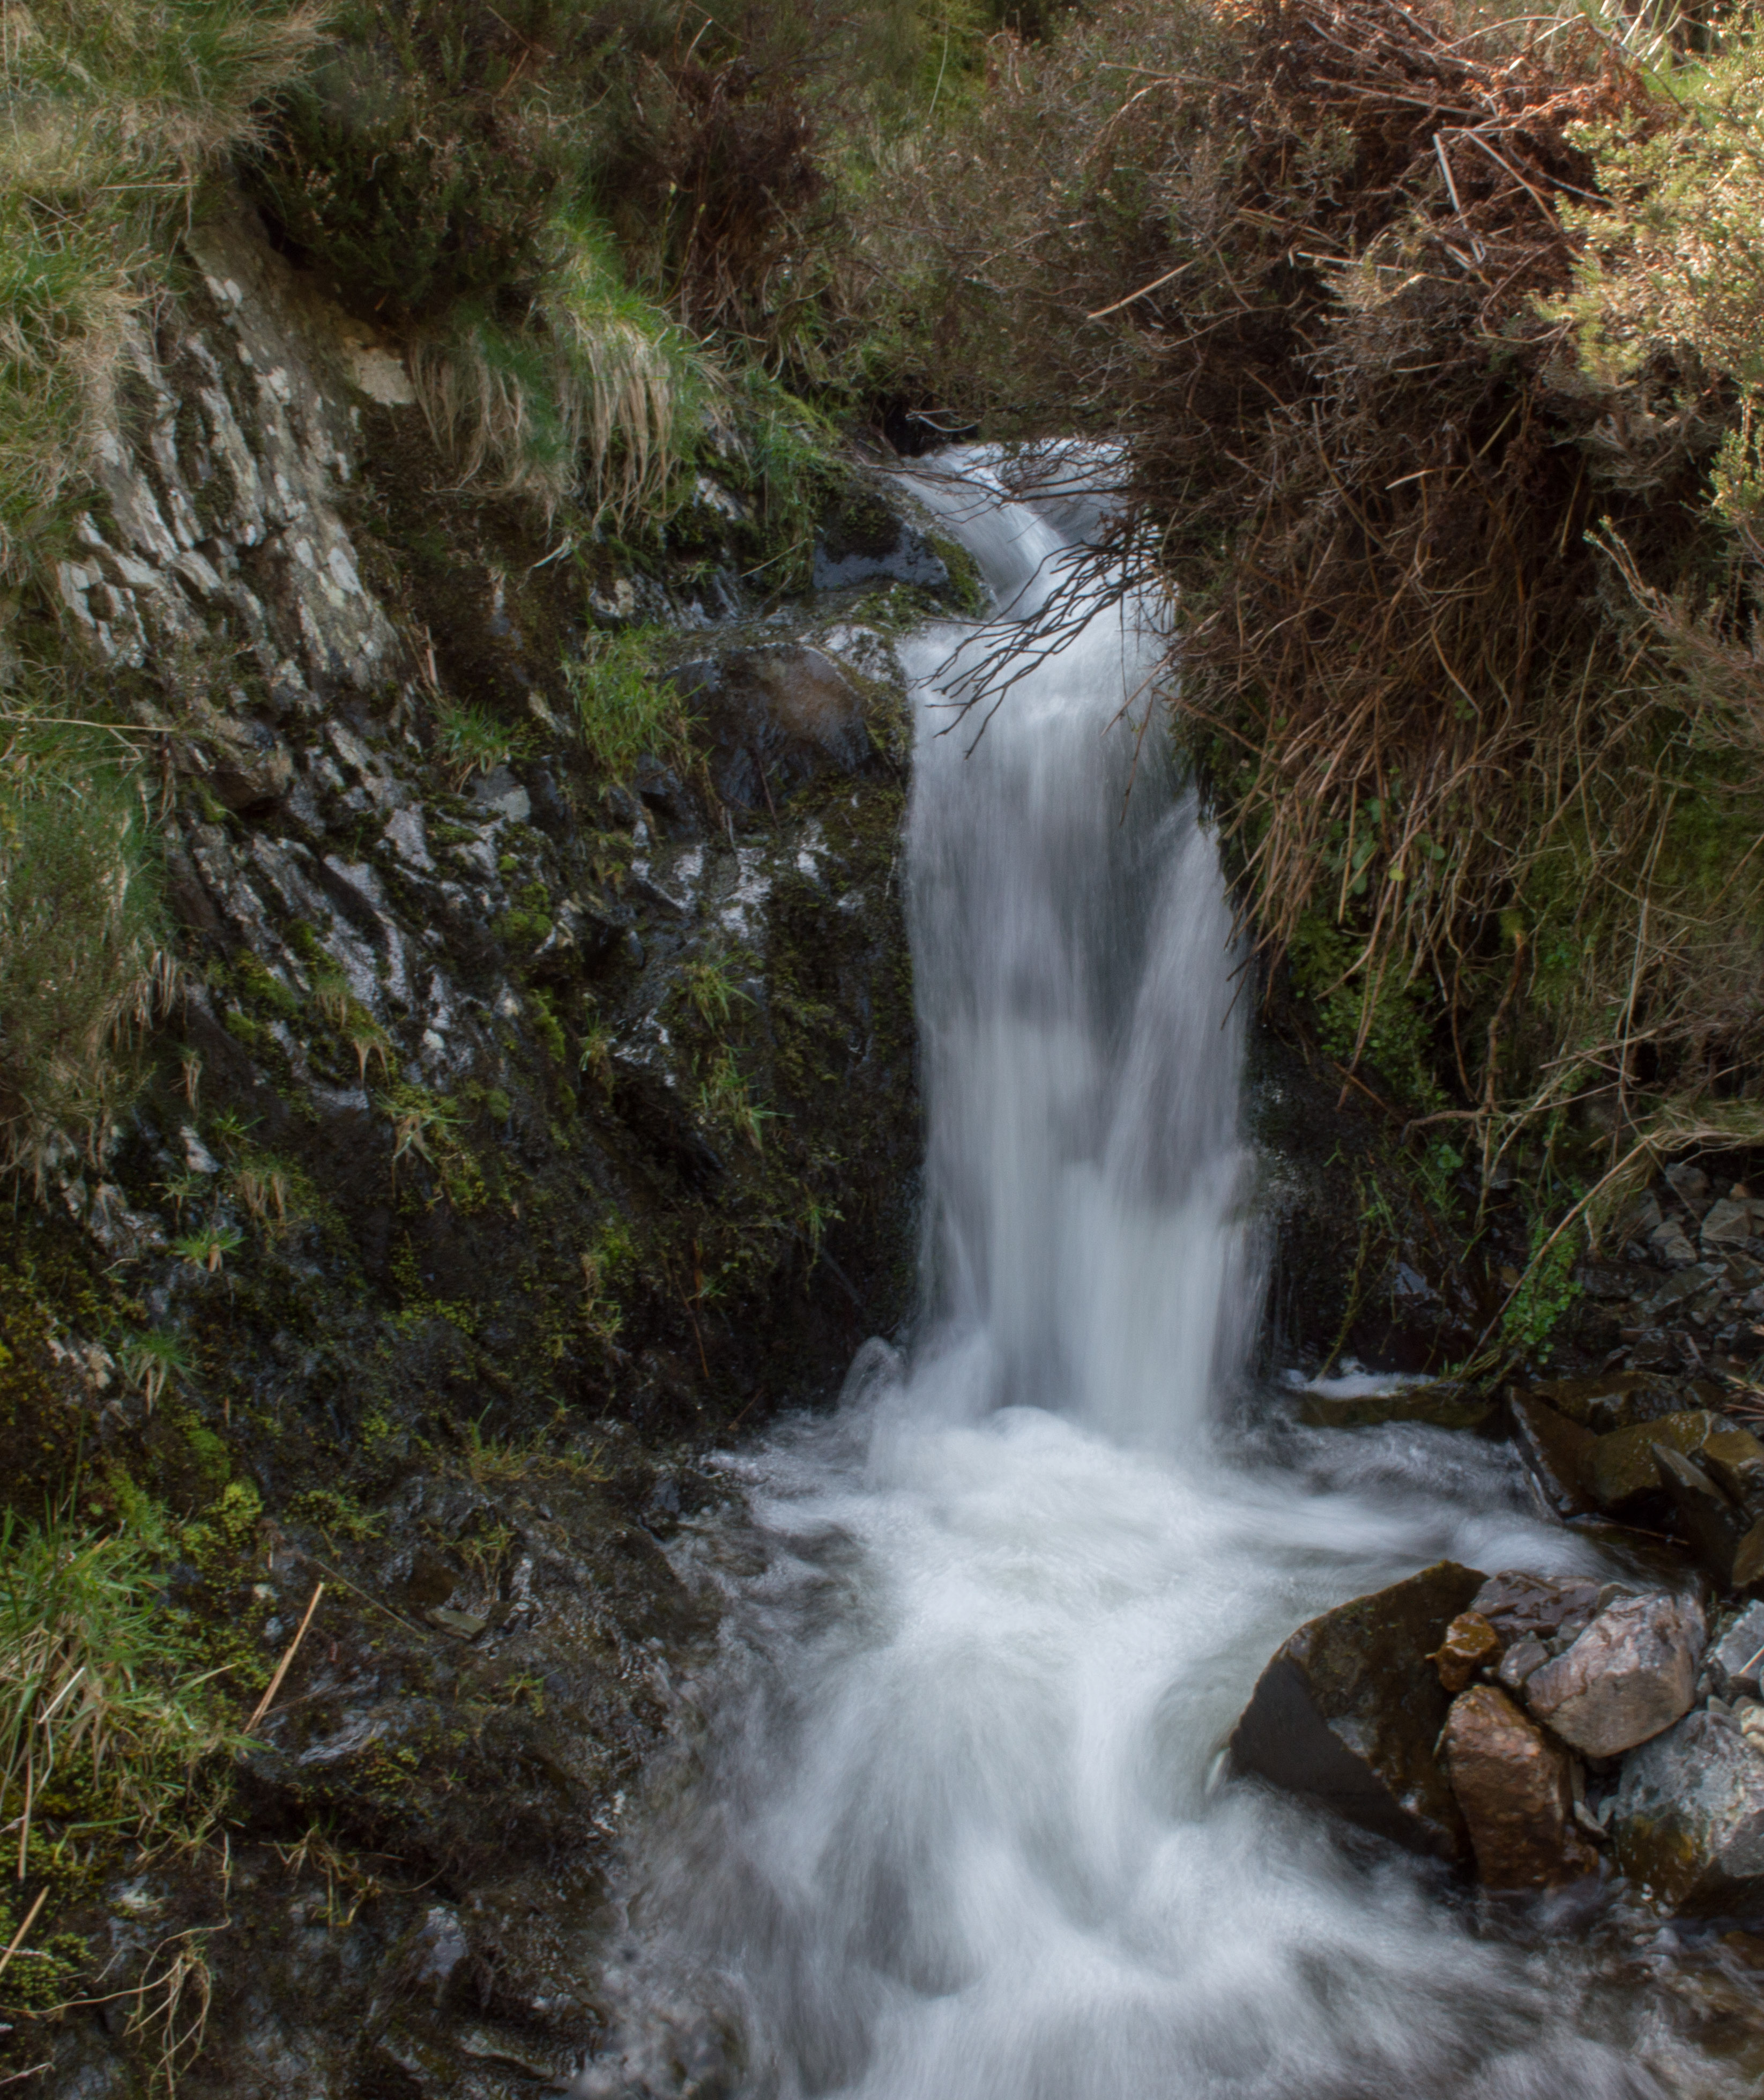 cardingmill valley waterfall (84 of 218)